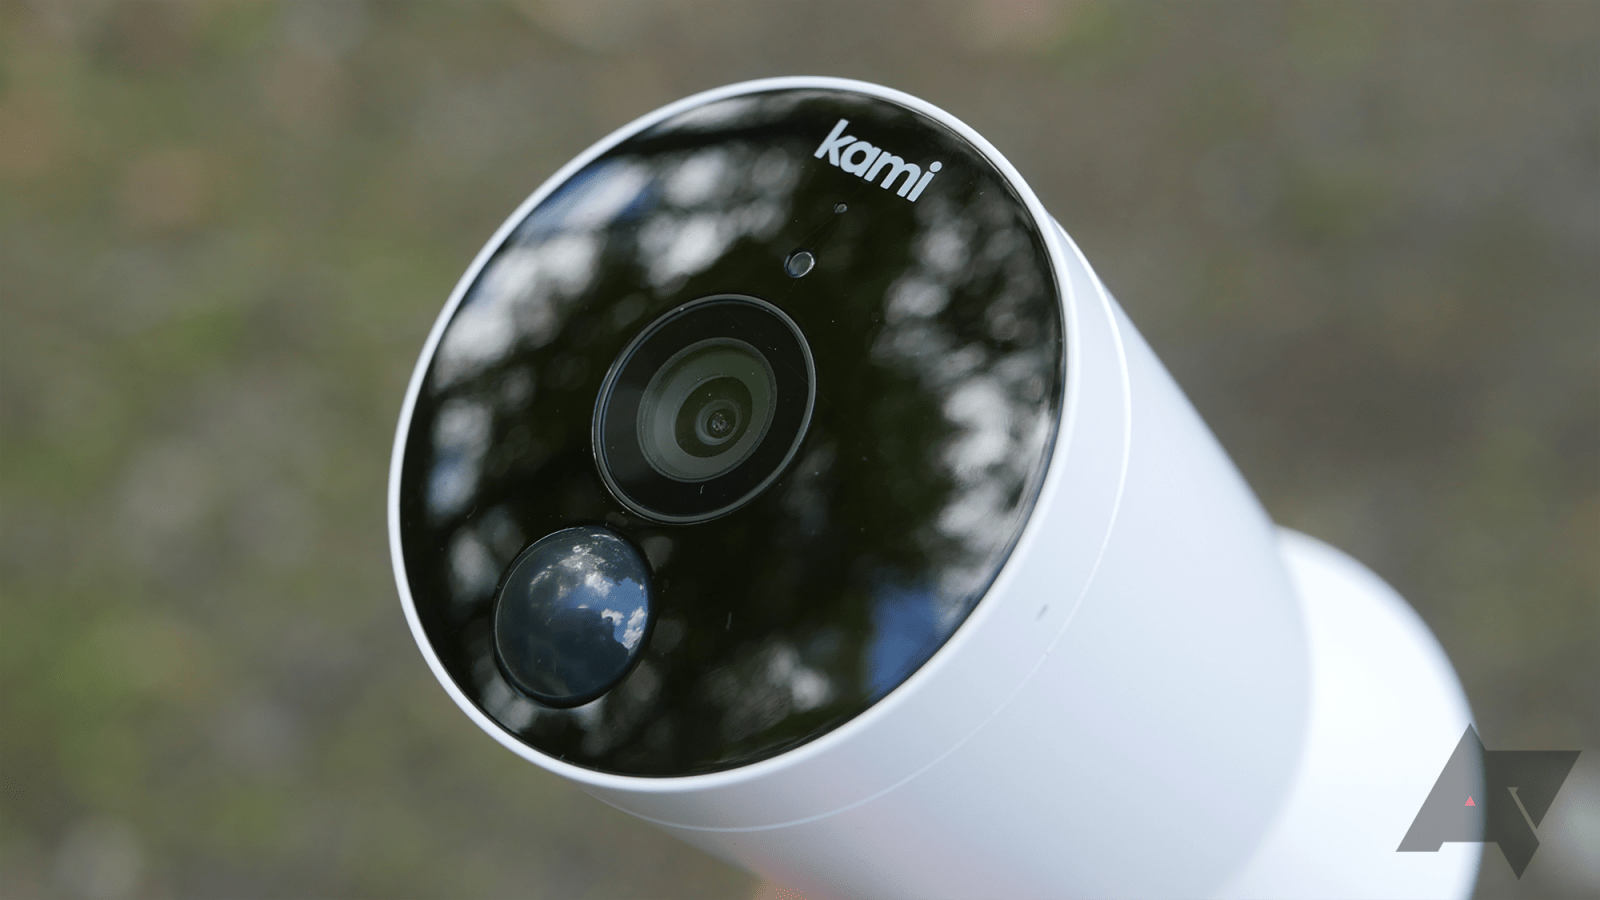 CCTV cameras YI Technology: smart technologies for the safety of loved ones